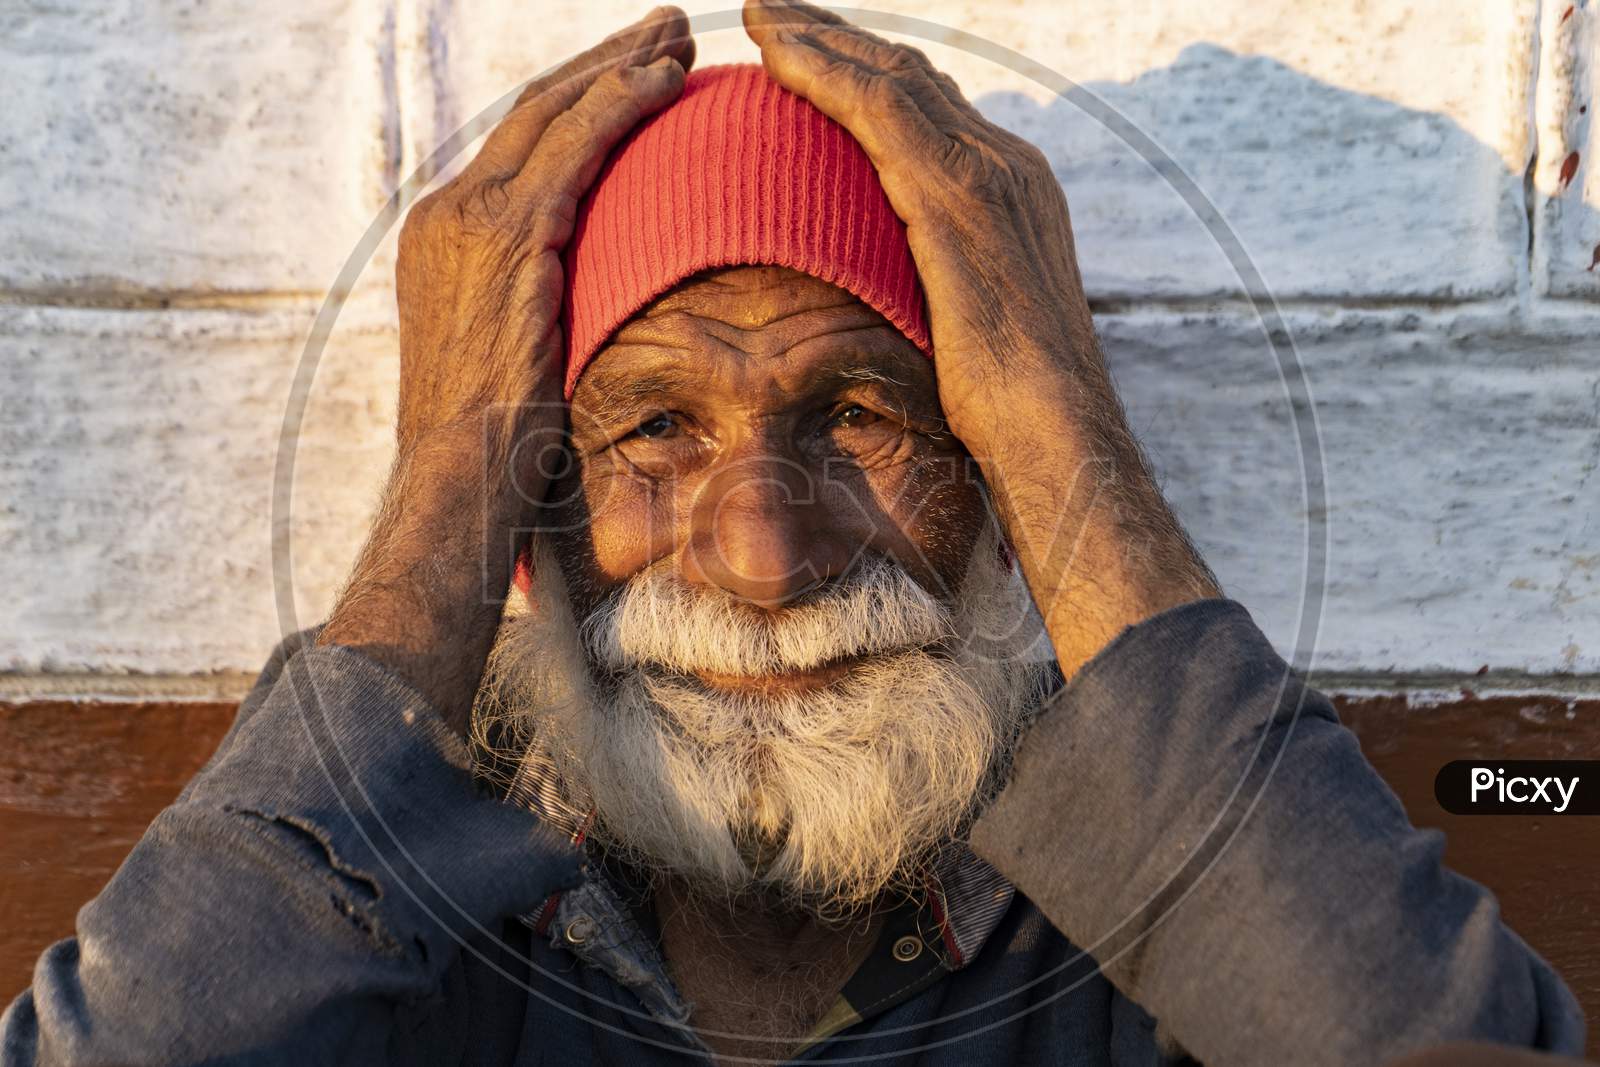 Portrait Of An Old Indian Man, Old Aged Man With Wrinkles On His Face Holding His Face With His Hands And Sitting In The Sunlight.